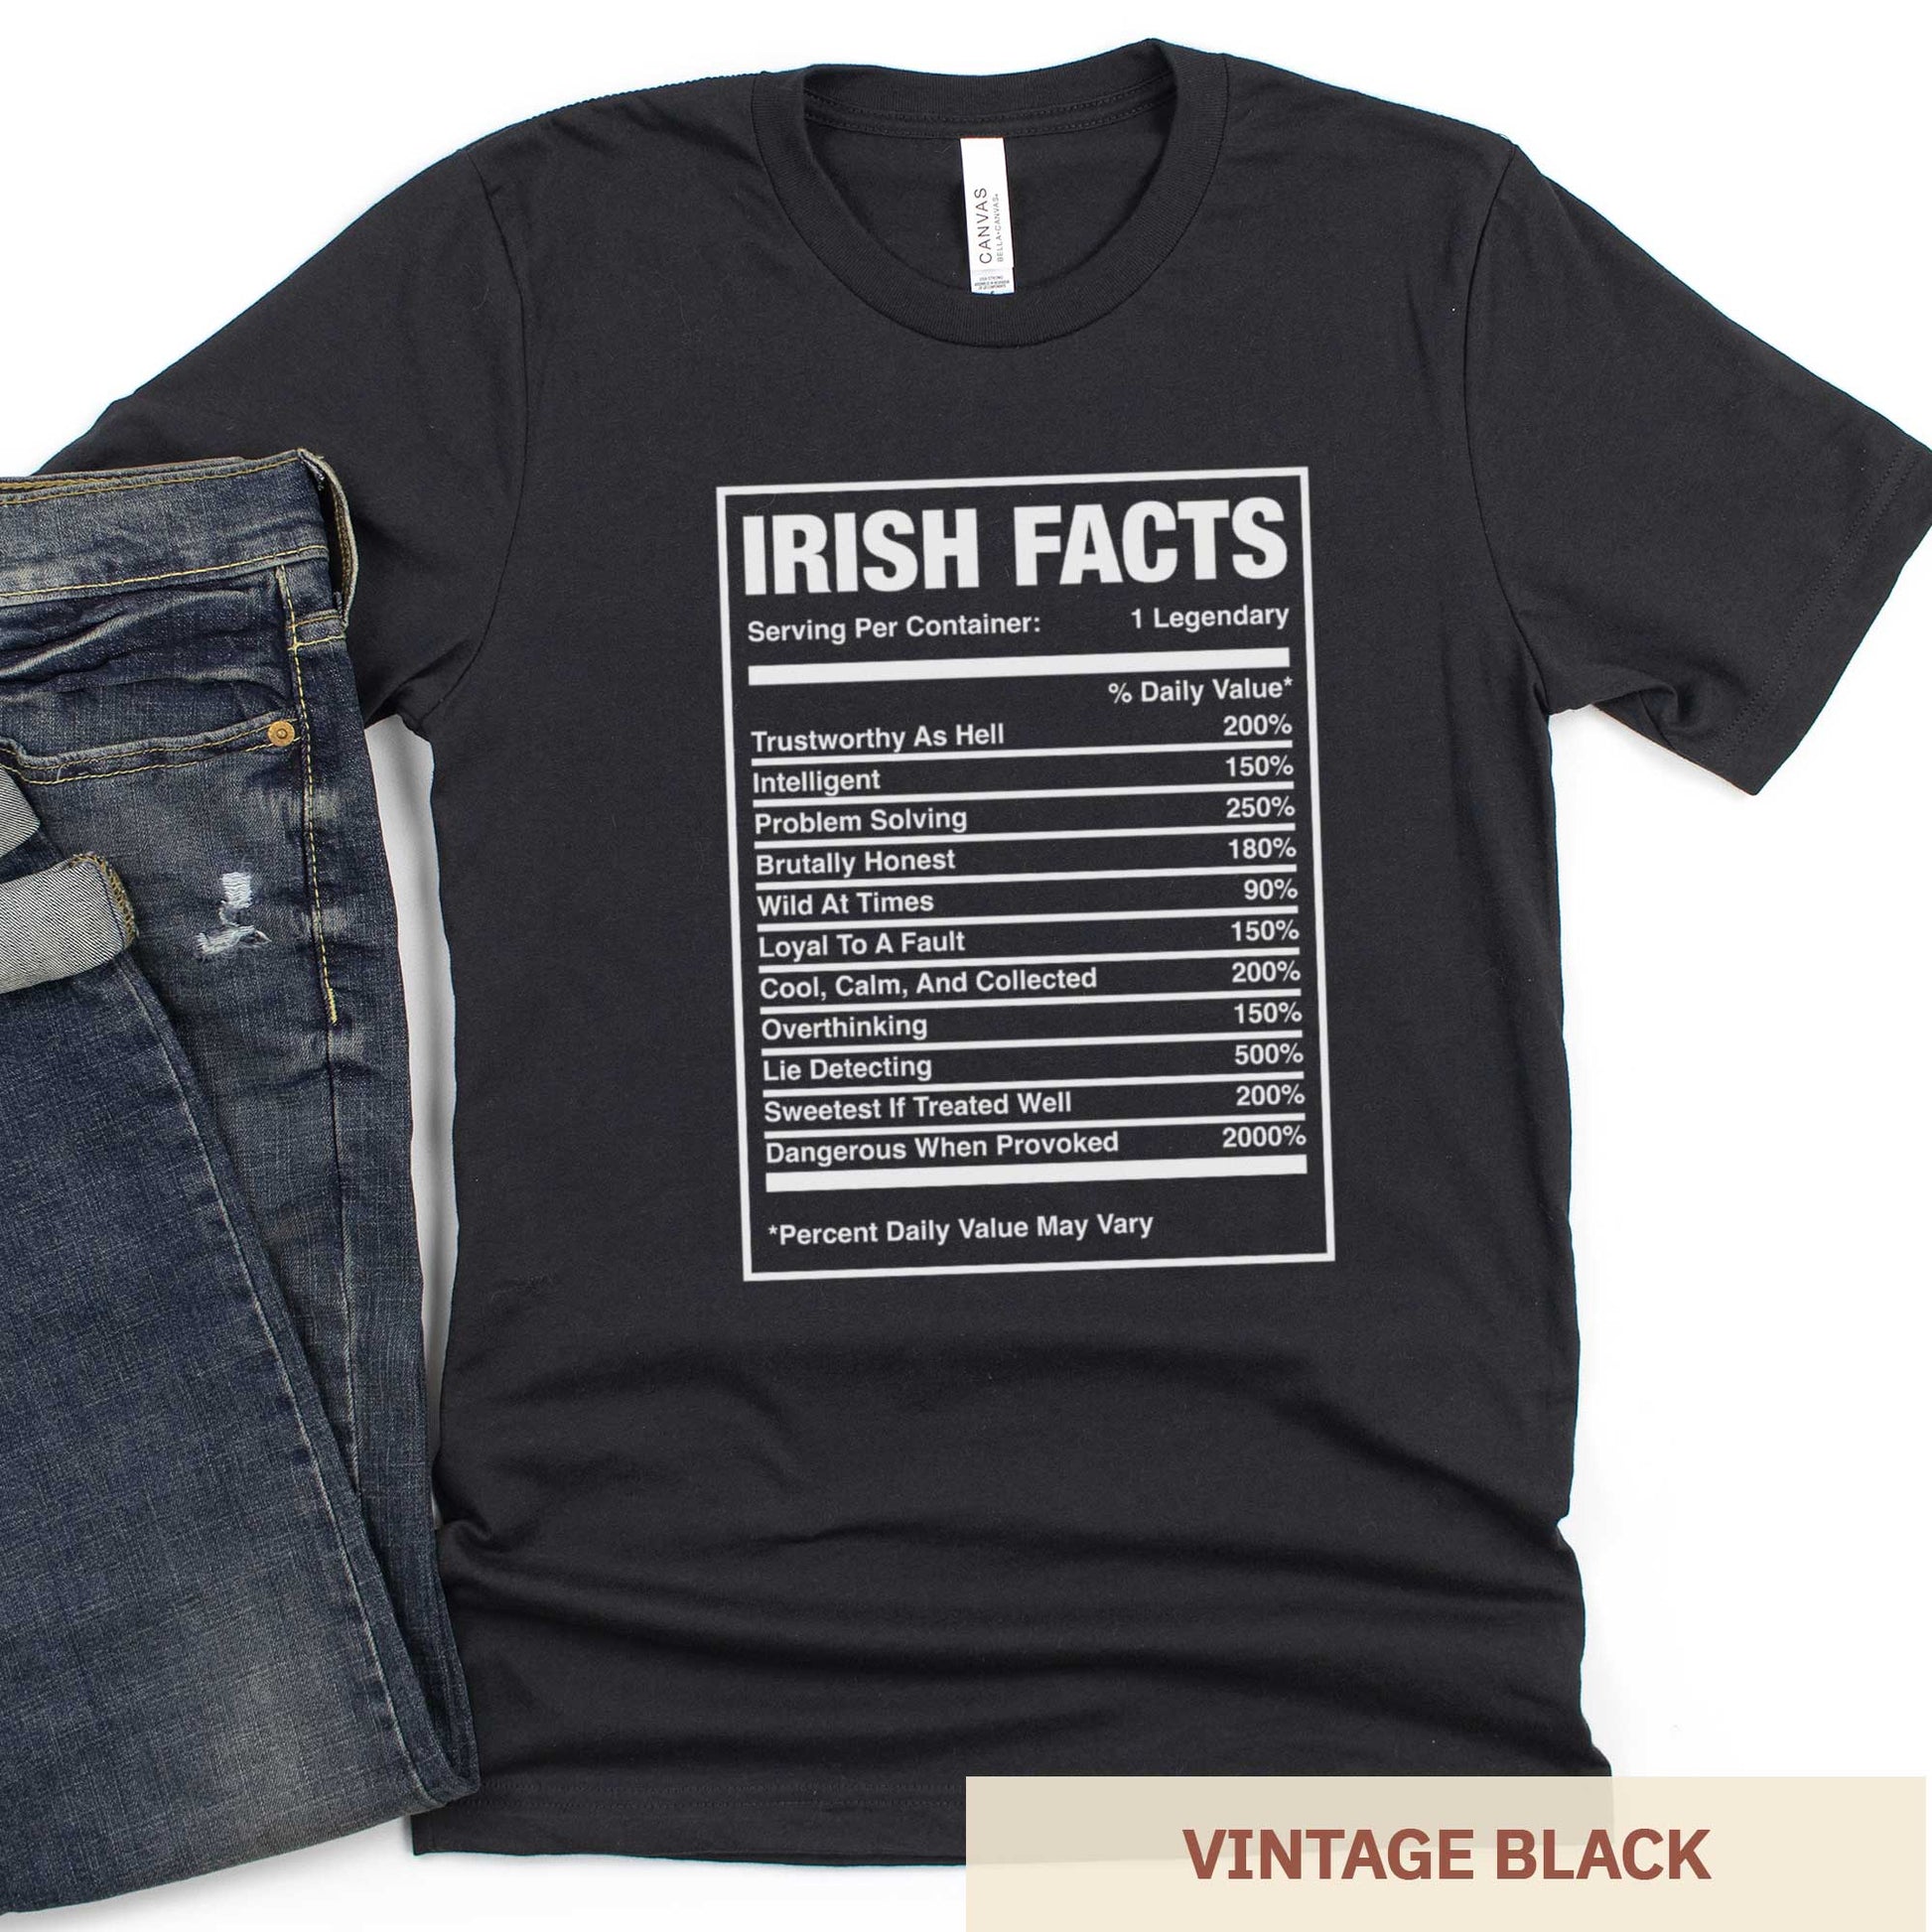 A vintage black Bella Canvas t-shirt that features a nutrition facts chart of Irish characteristics.